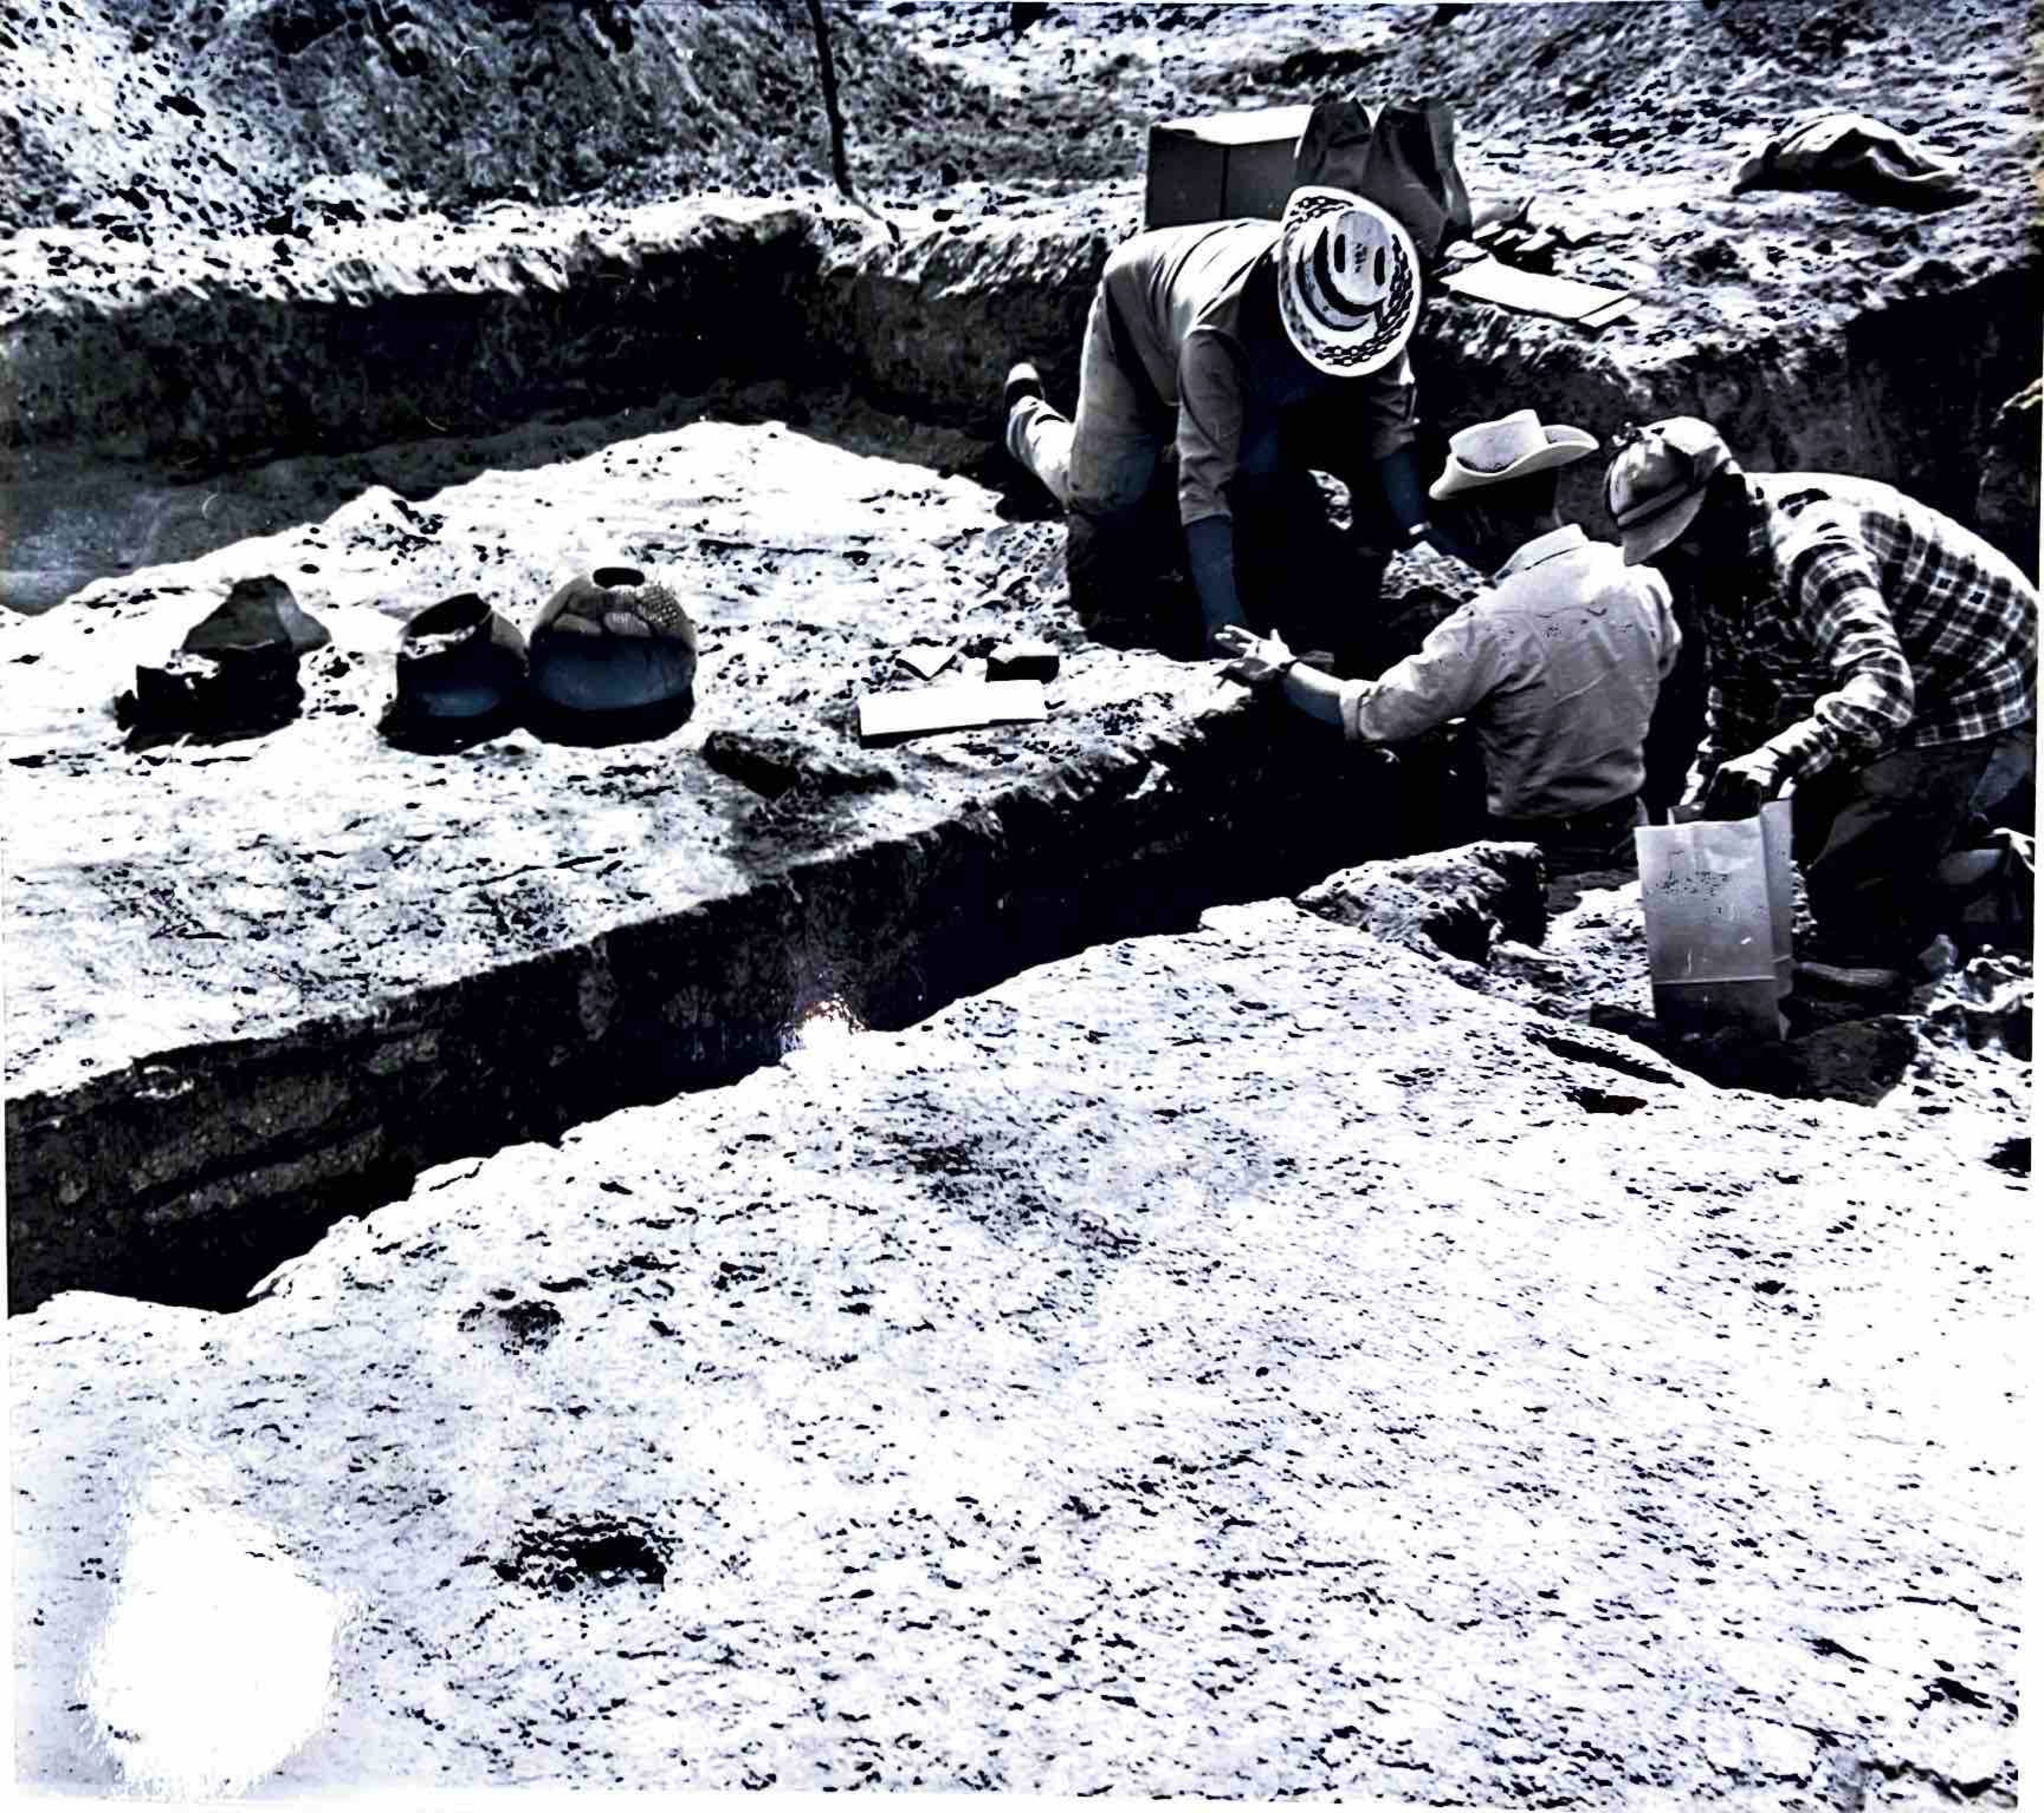 A historic site is excavated near Snaketown in this undated photo.